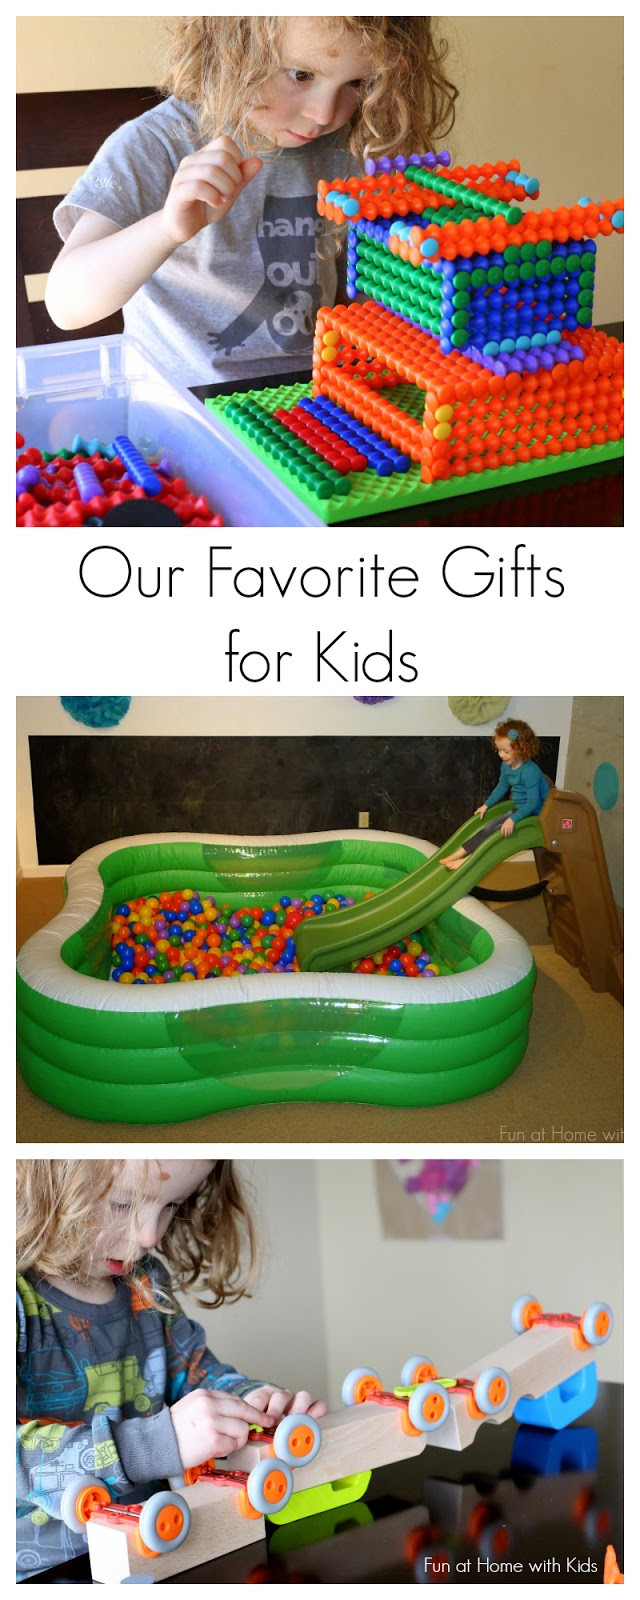 Unique Birthday Gifts For Kids
 Our 10 Best and Favorite Gift Ideas for Kids